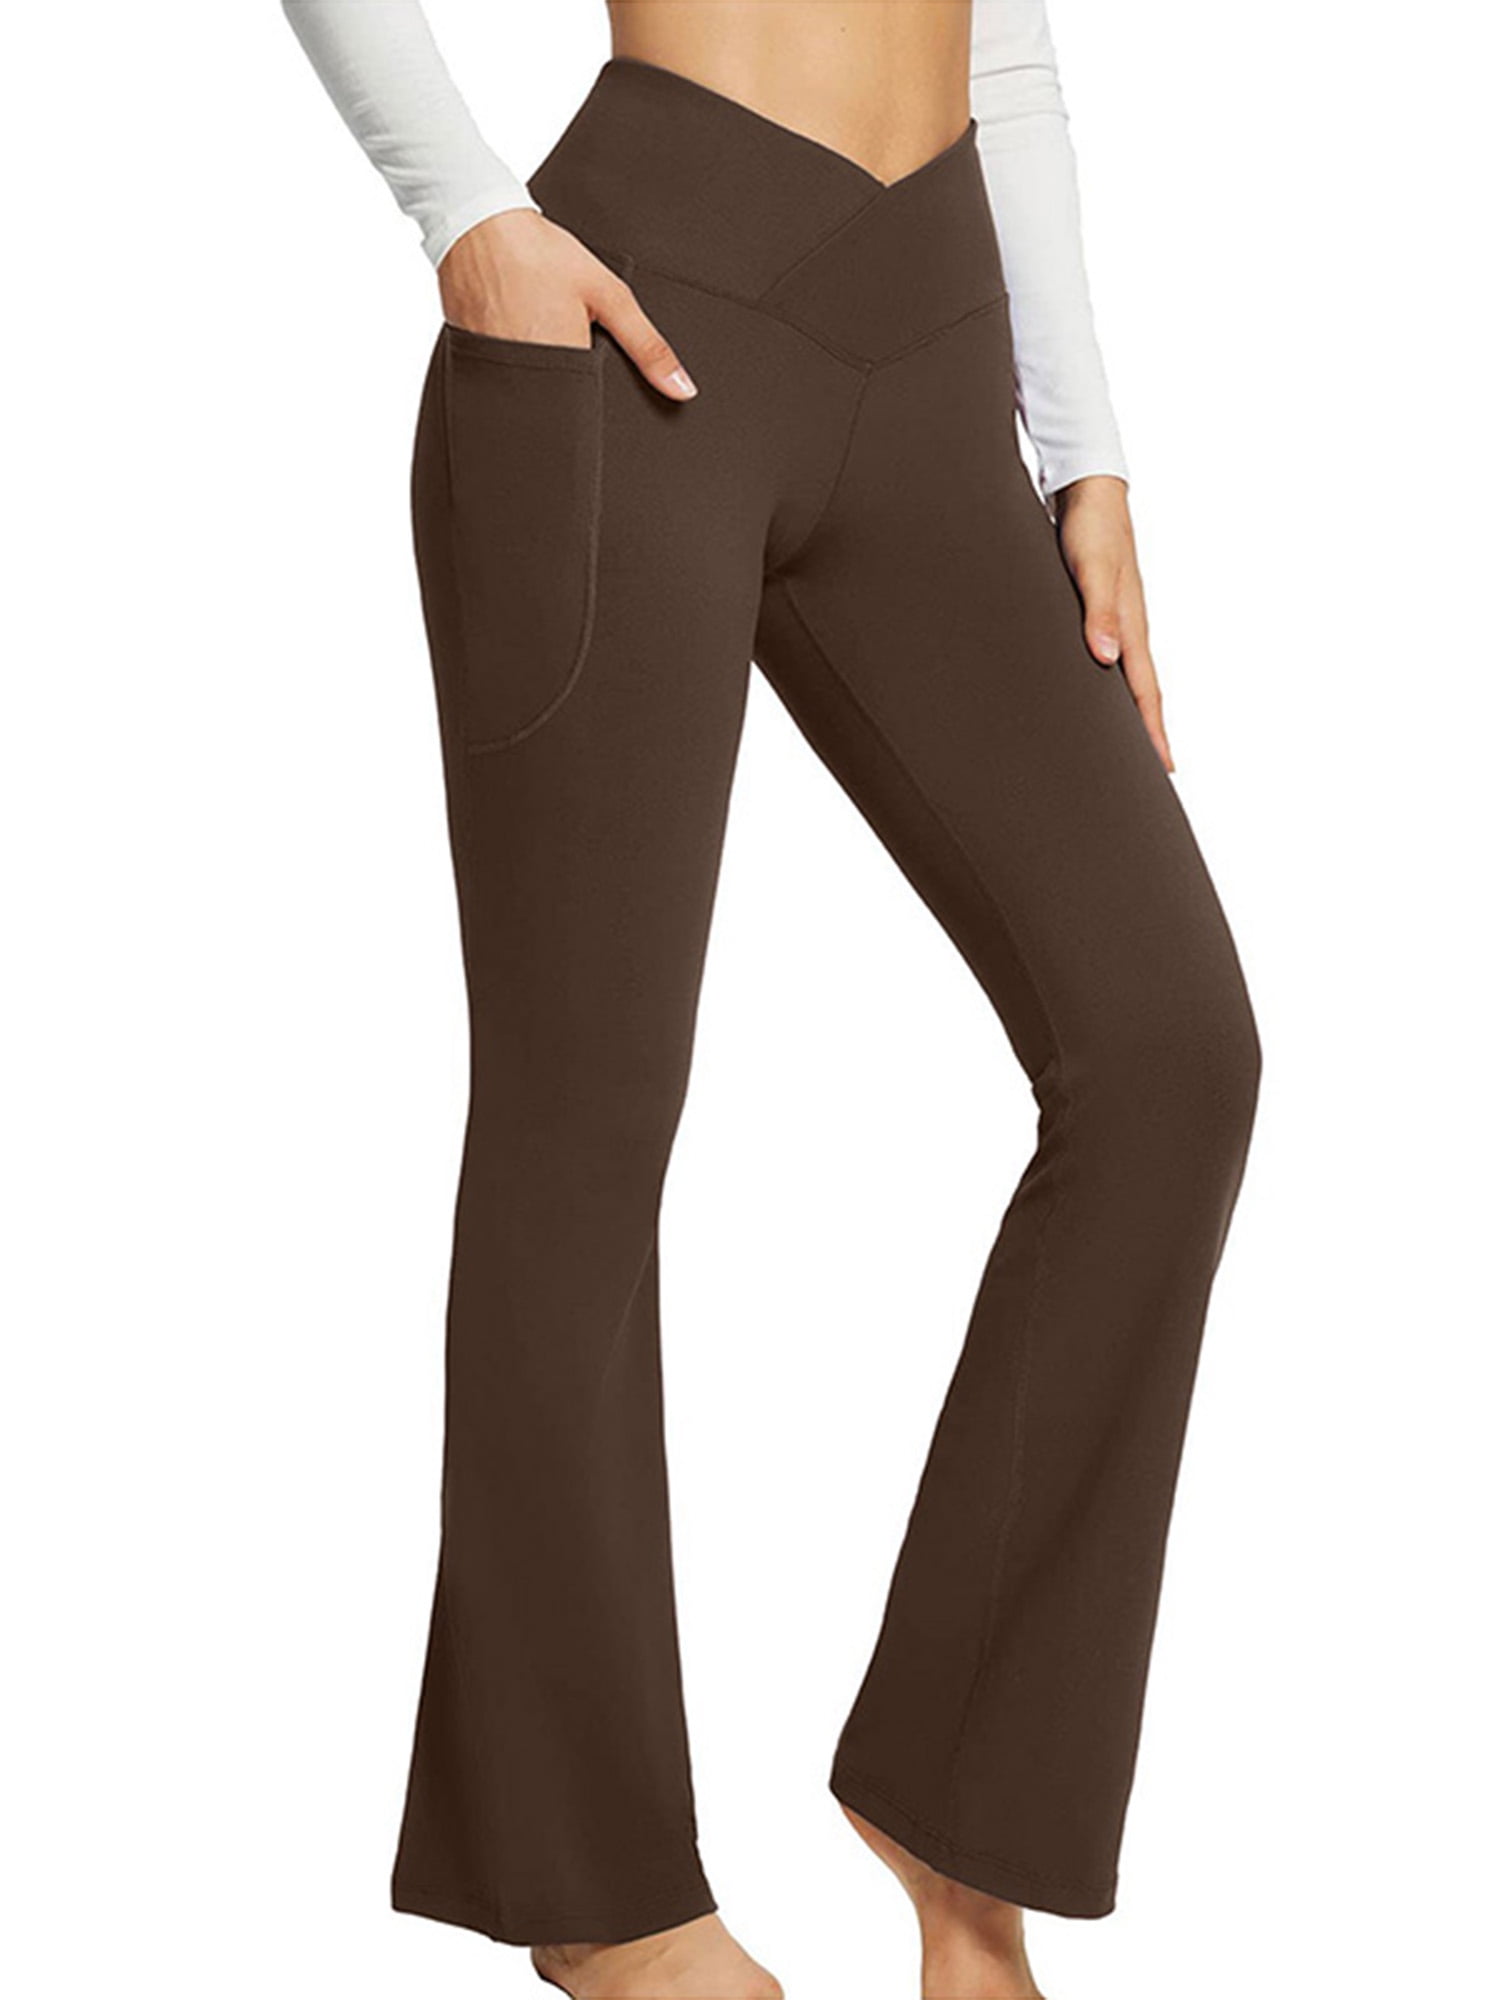 Frontwalk Women's Flare Yoga Pants Crossover High Waisted